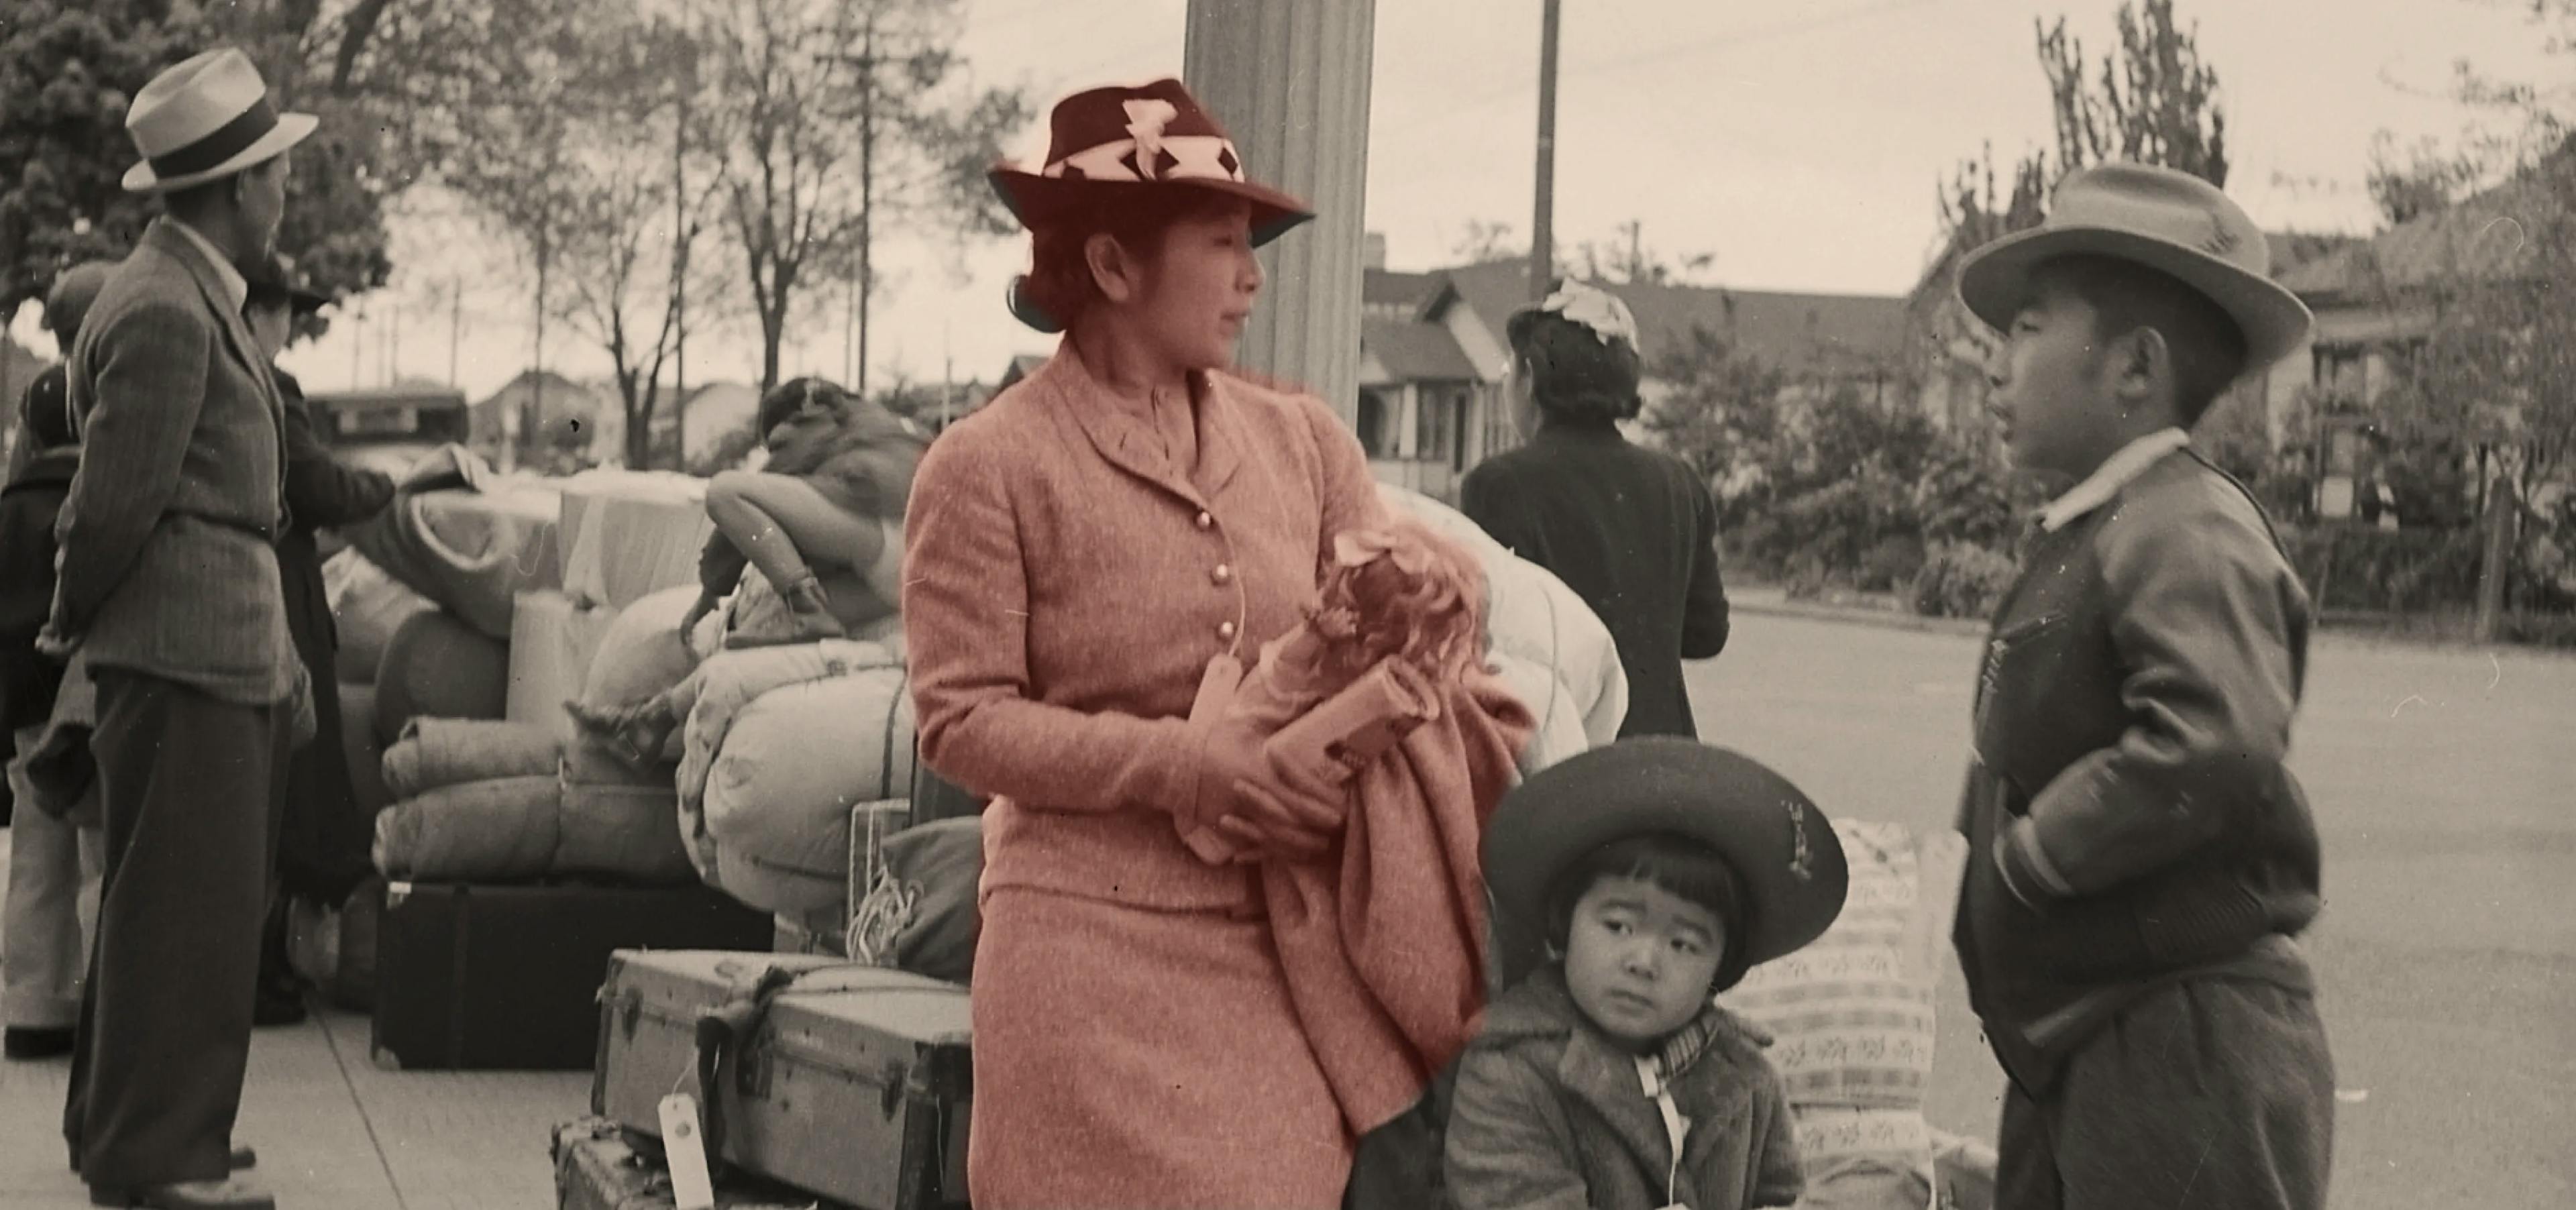 Hisako Hibi and her young daughter stand in front of a pile of luggage, with other people in the background. Hisako is holding her daughter's doll and speaking with a young man. She is in color for emphasis, but the rest of the image is black and white.